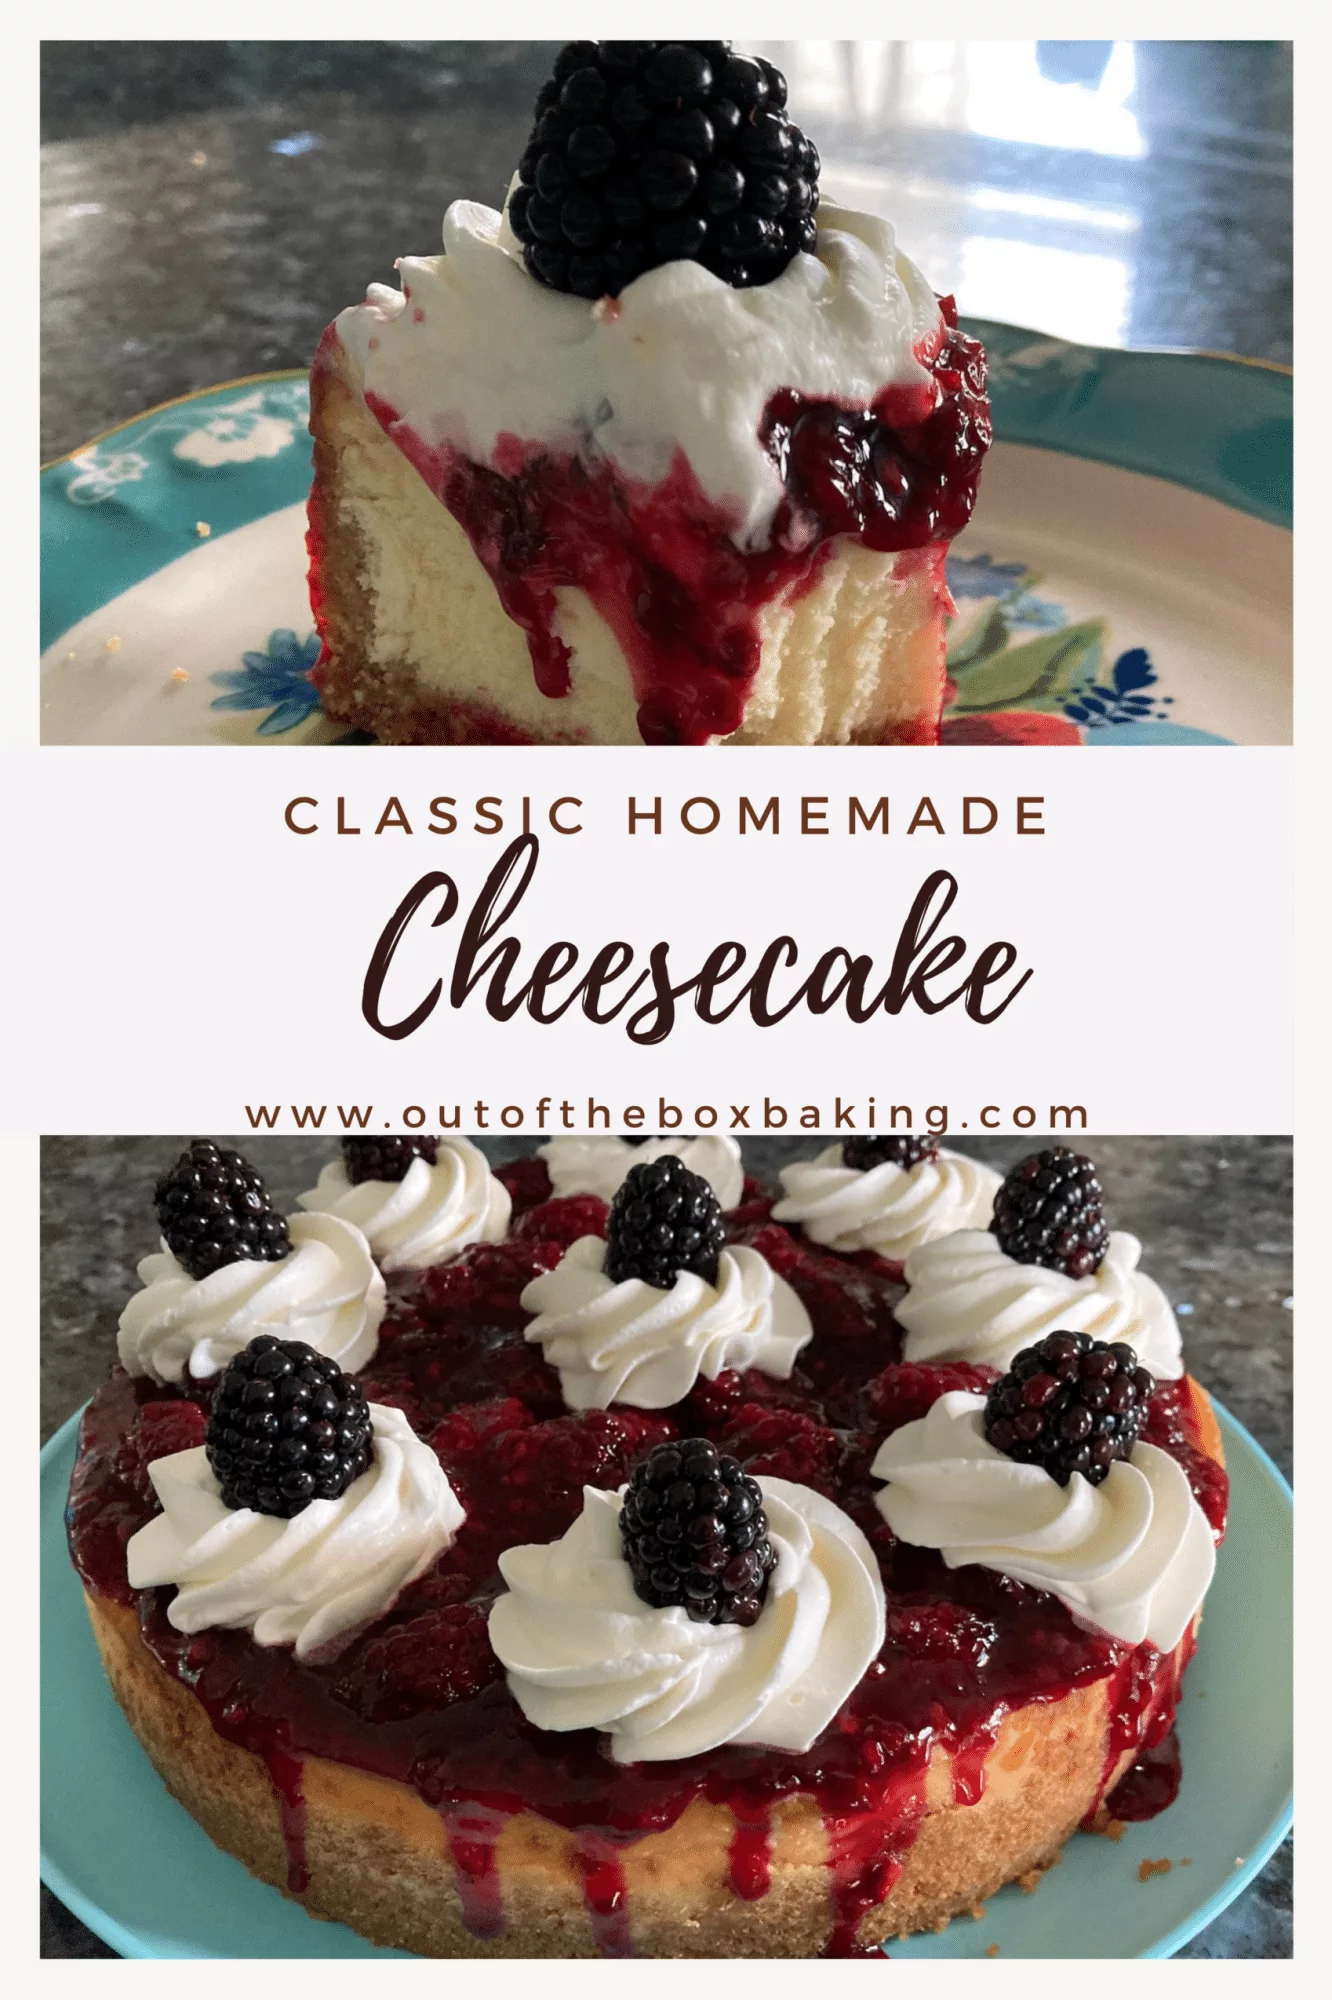 Classic Homemade Cheesecake Recipe from Out of the Box Baking.com